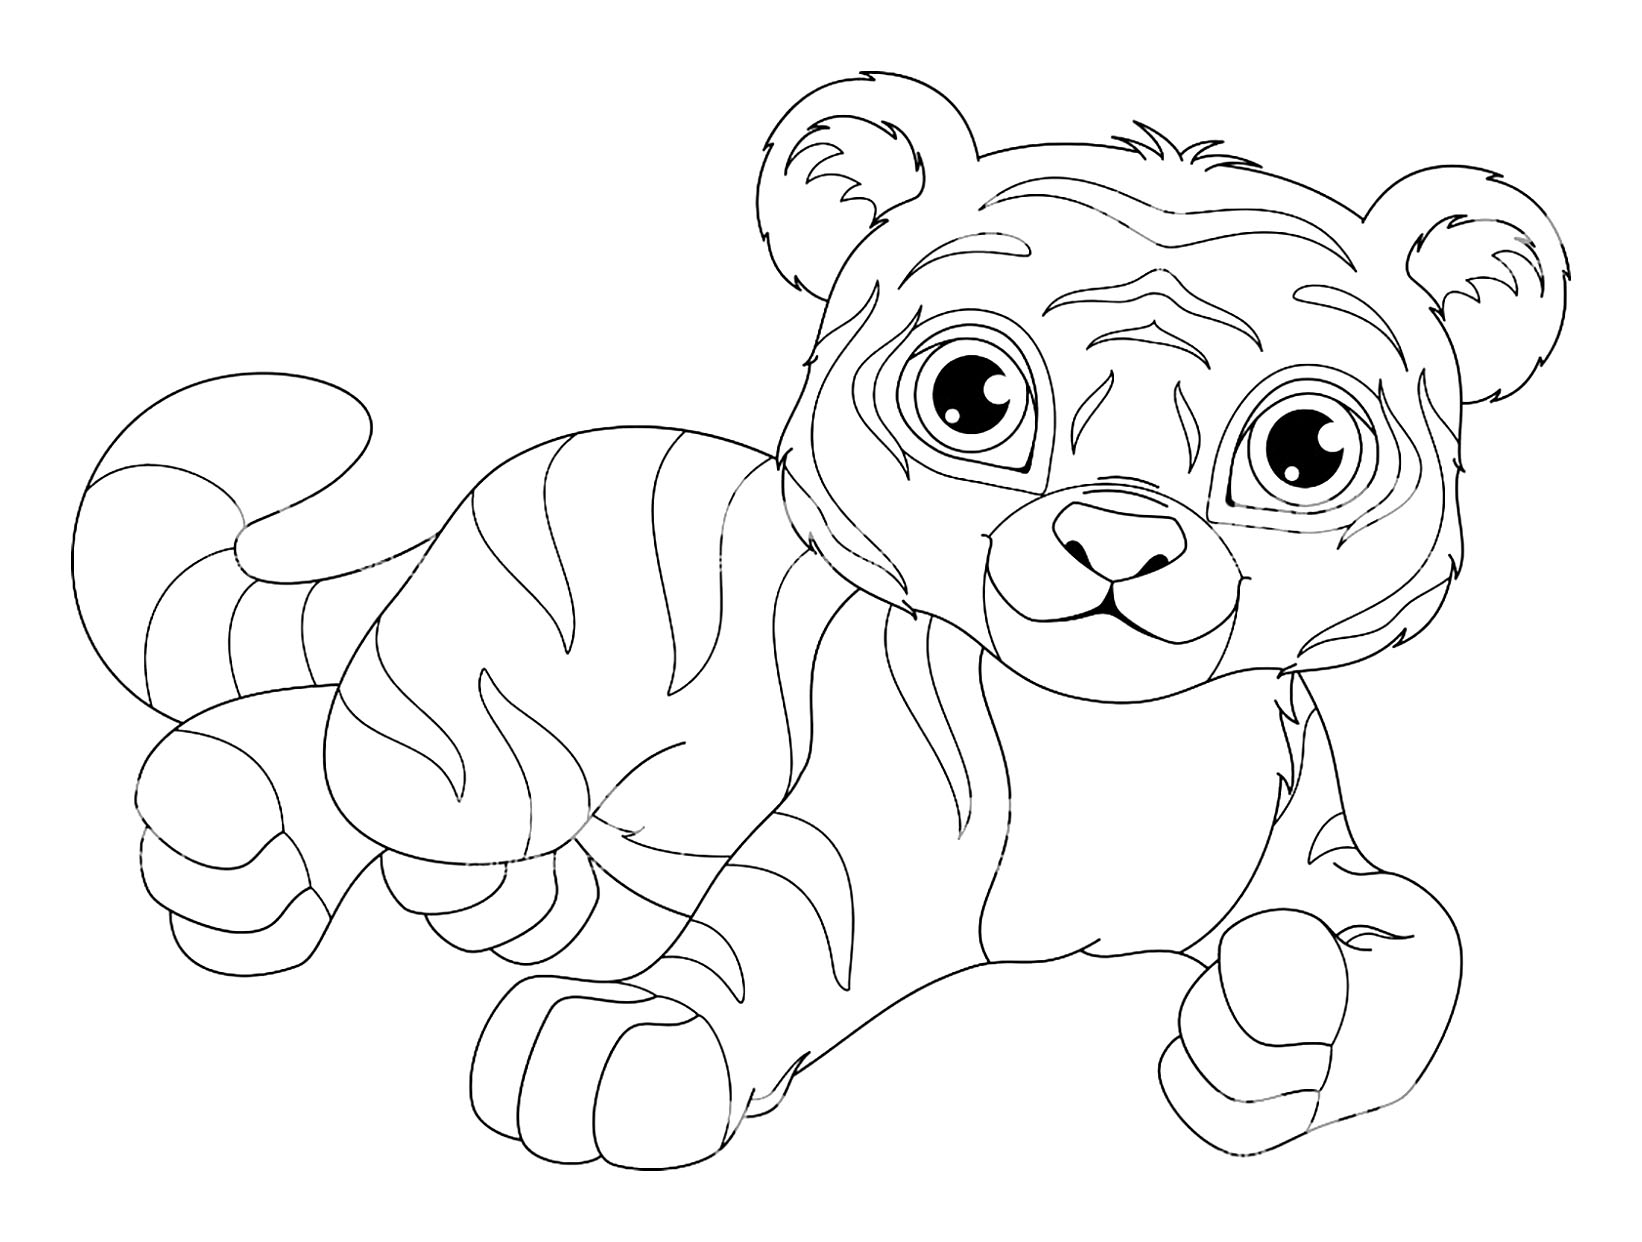 Cute Cartoon Tigers Coloring Pages